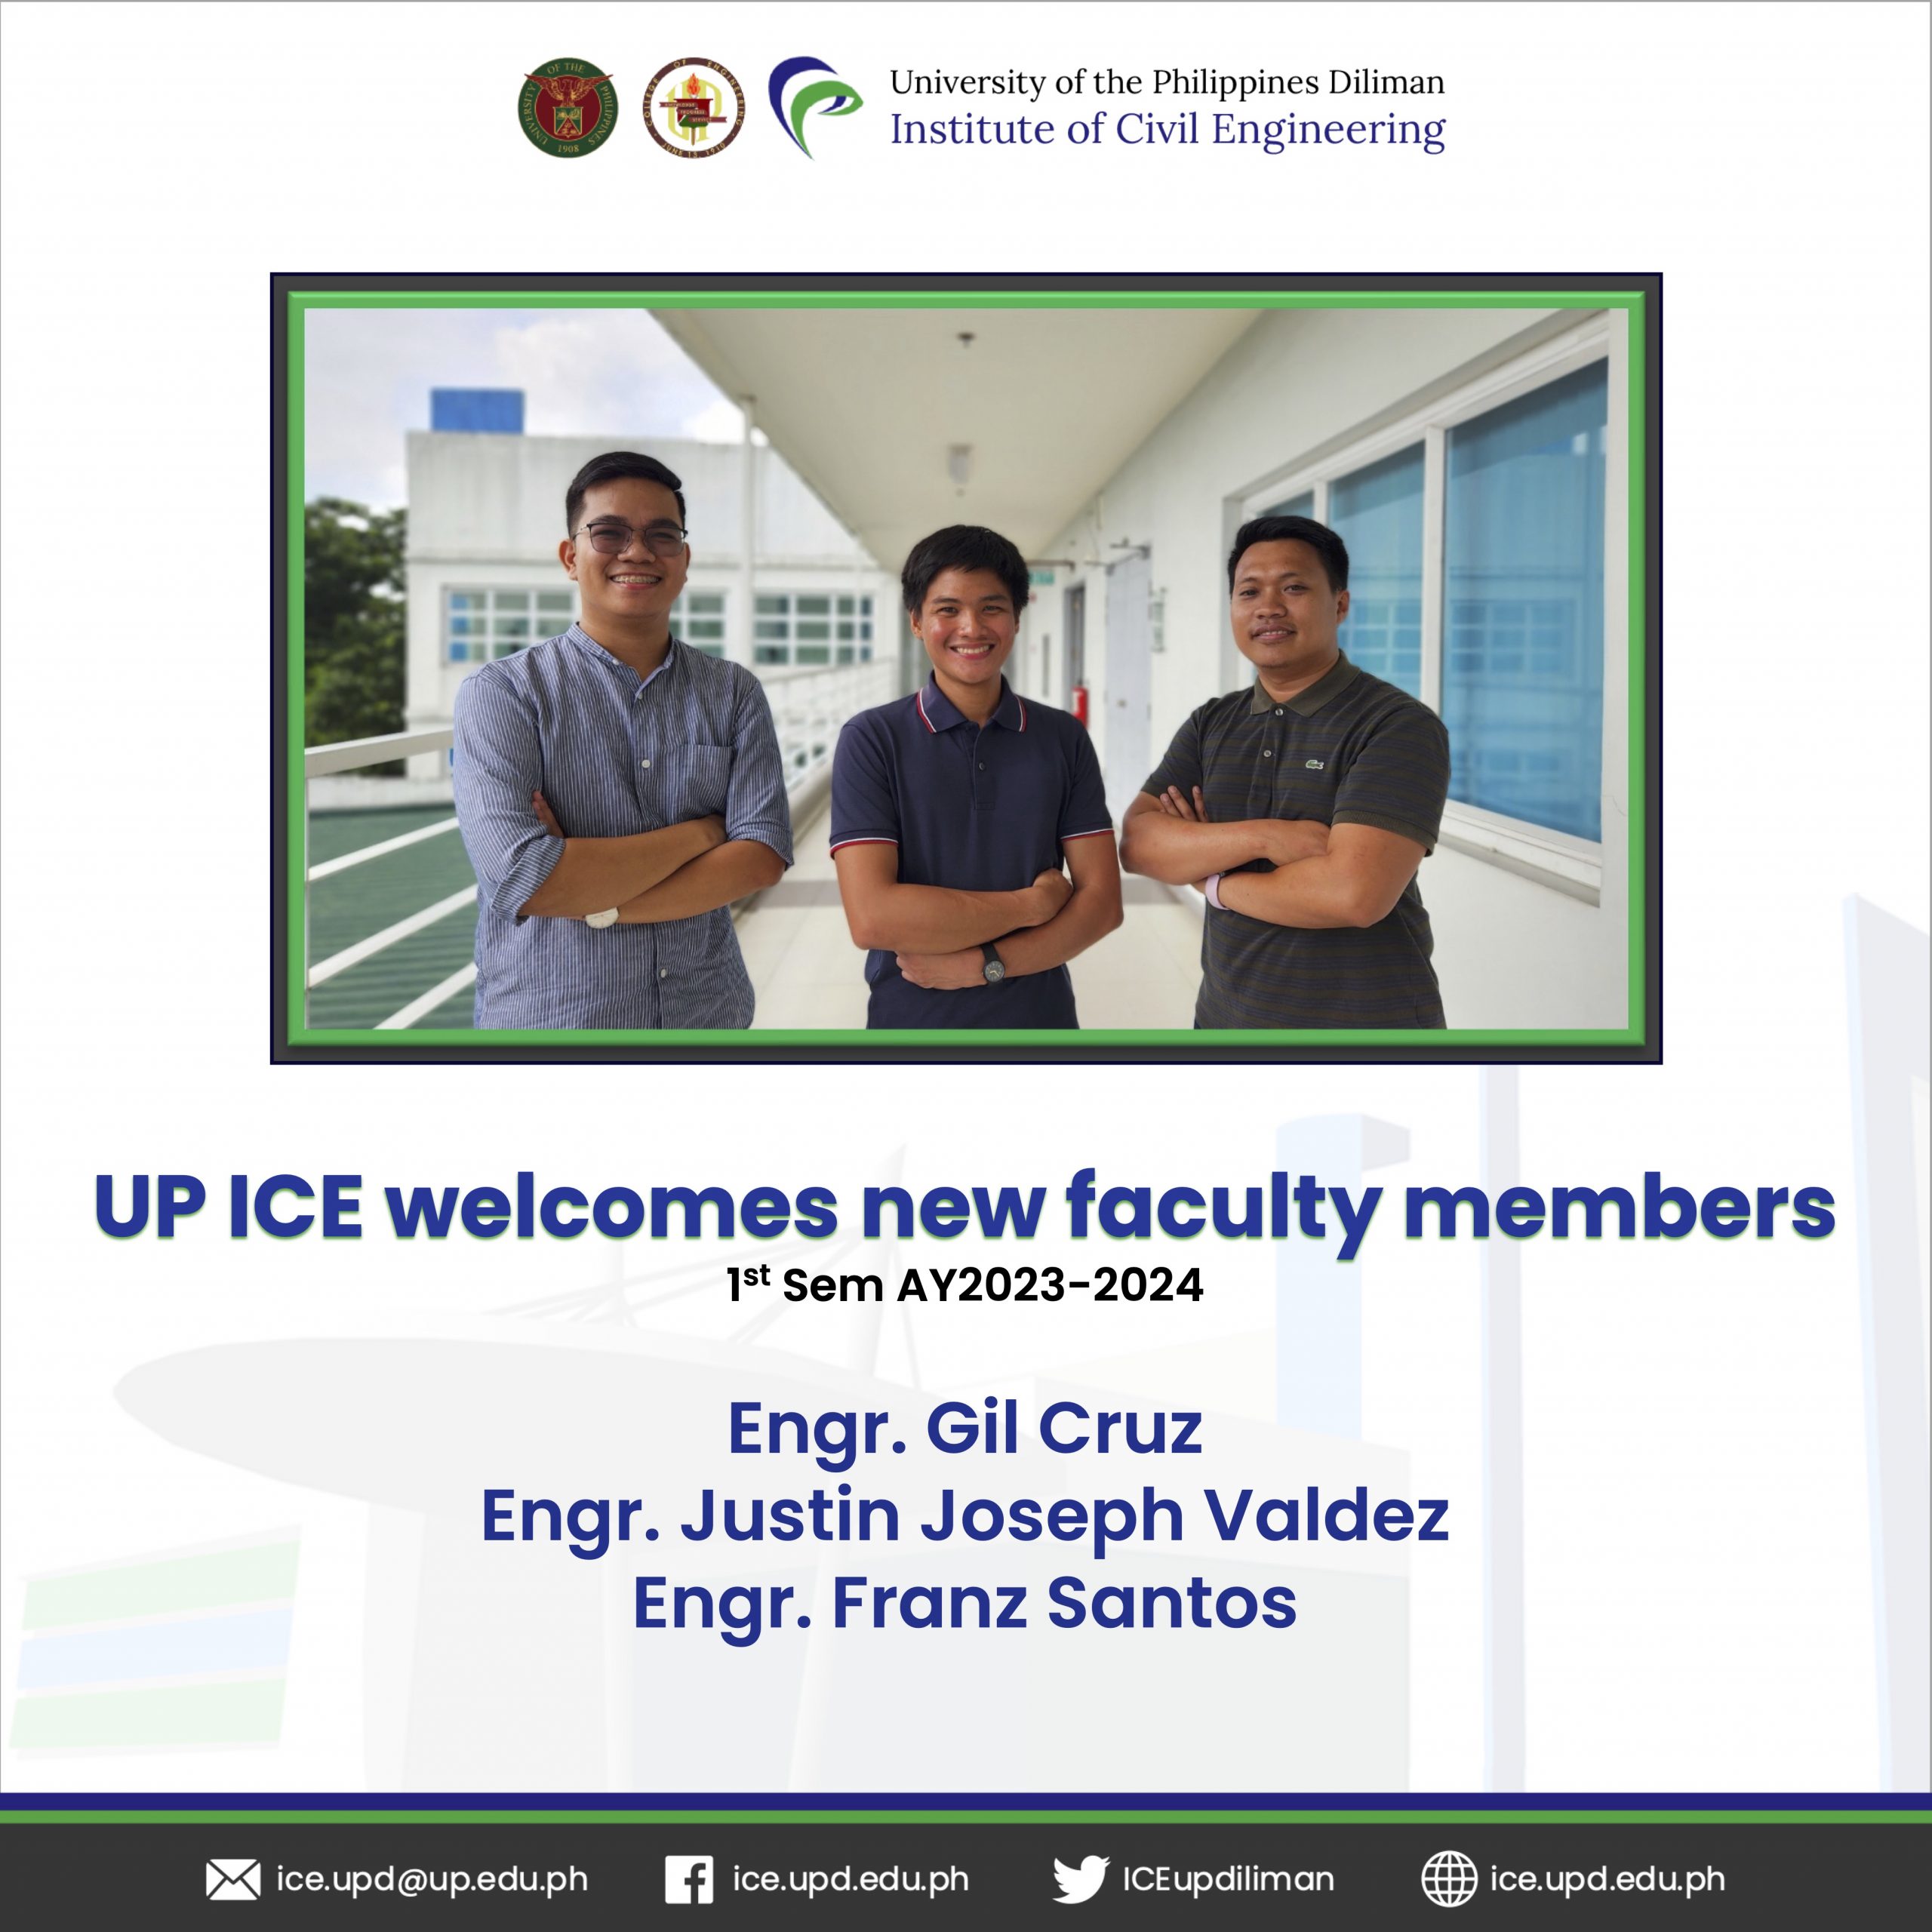 UP ICE welcomes new faculty members (1st Sem AY2023-2024)